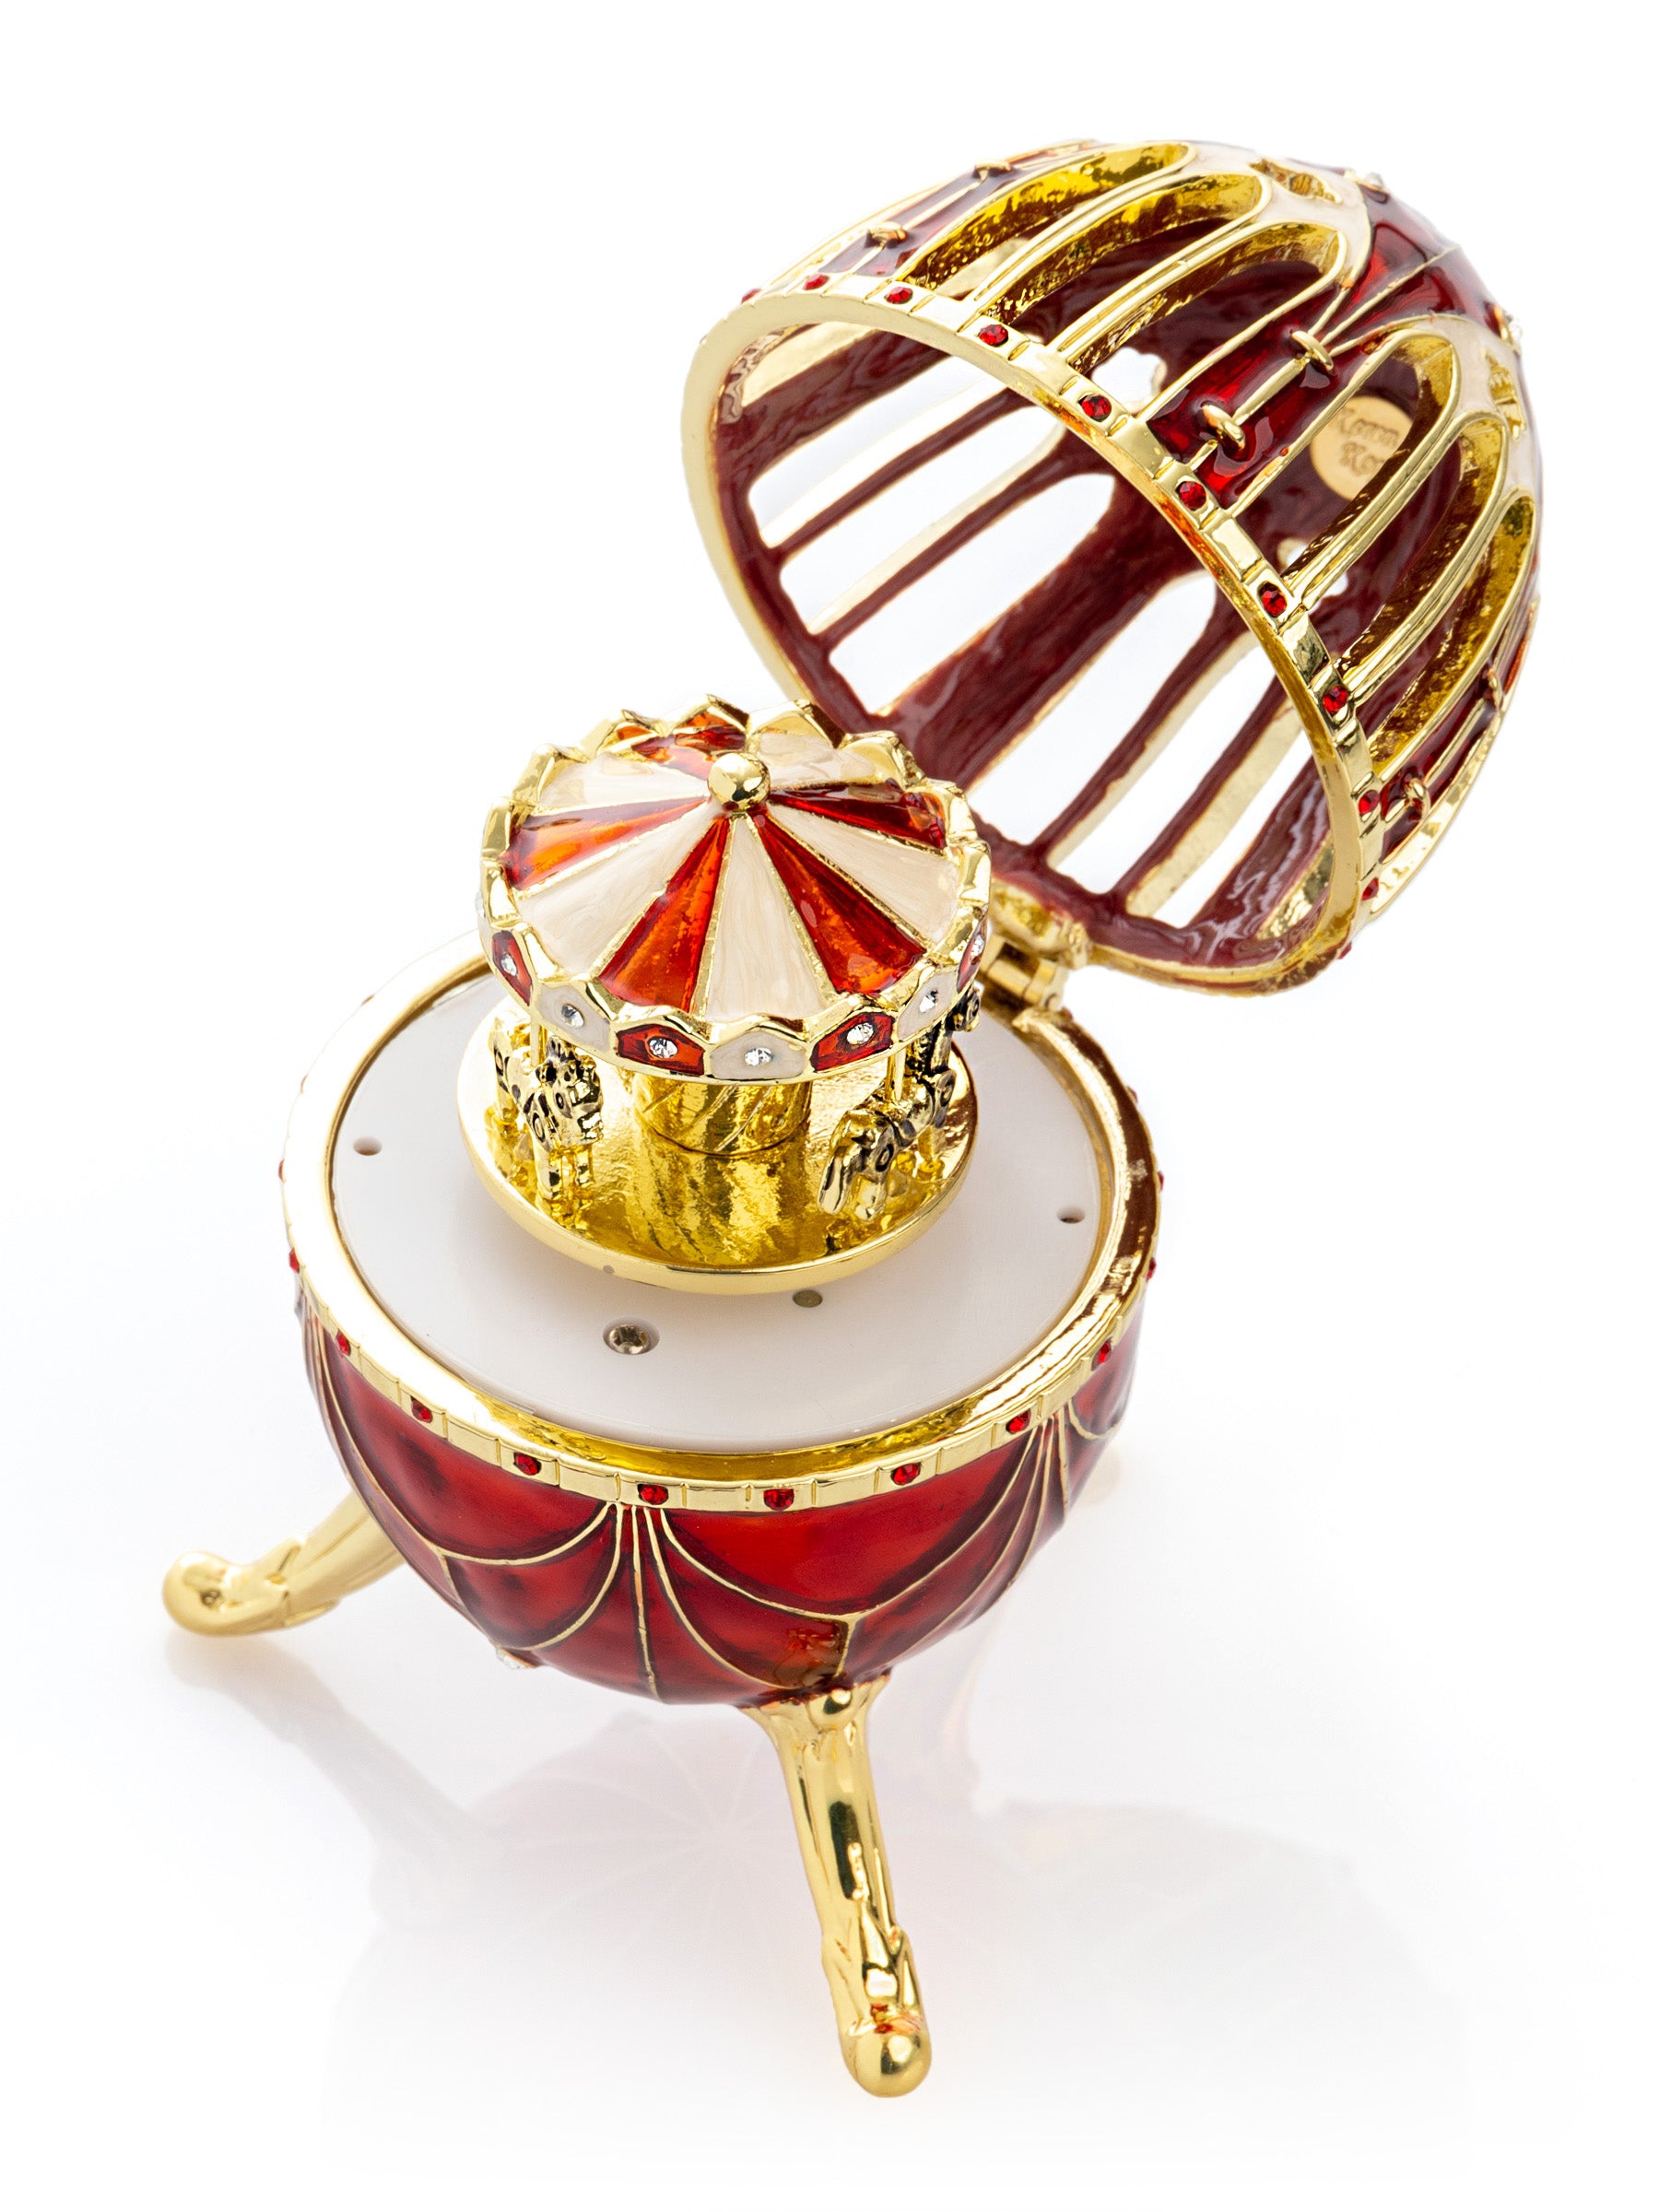 Red Faberge Egg with Horse Carousel Surprise Inside